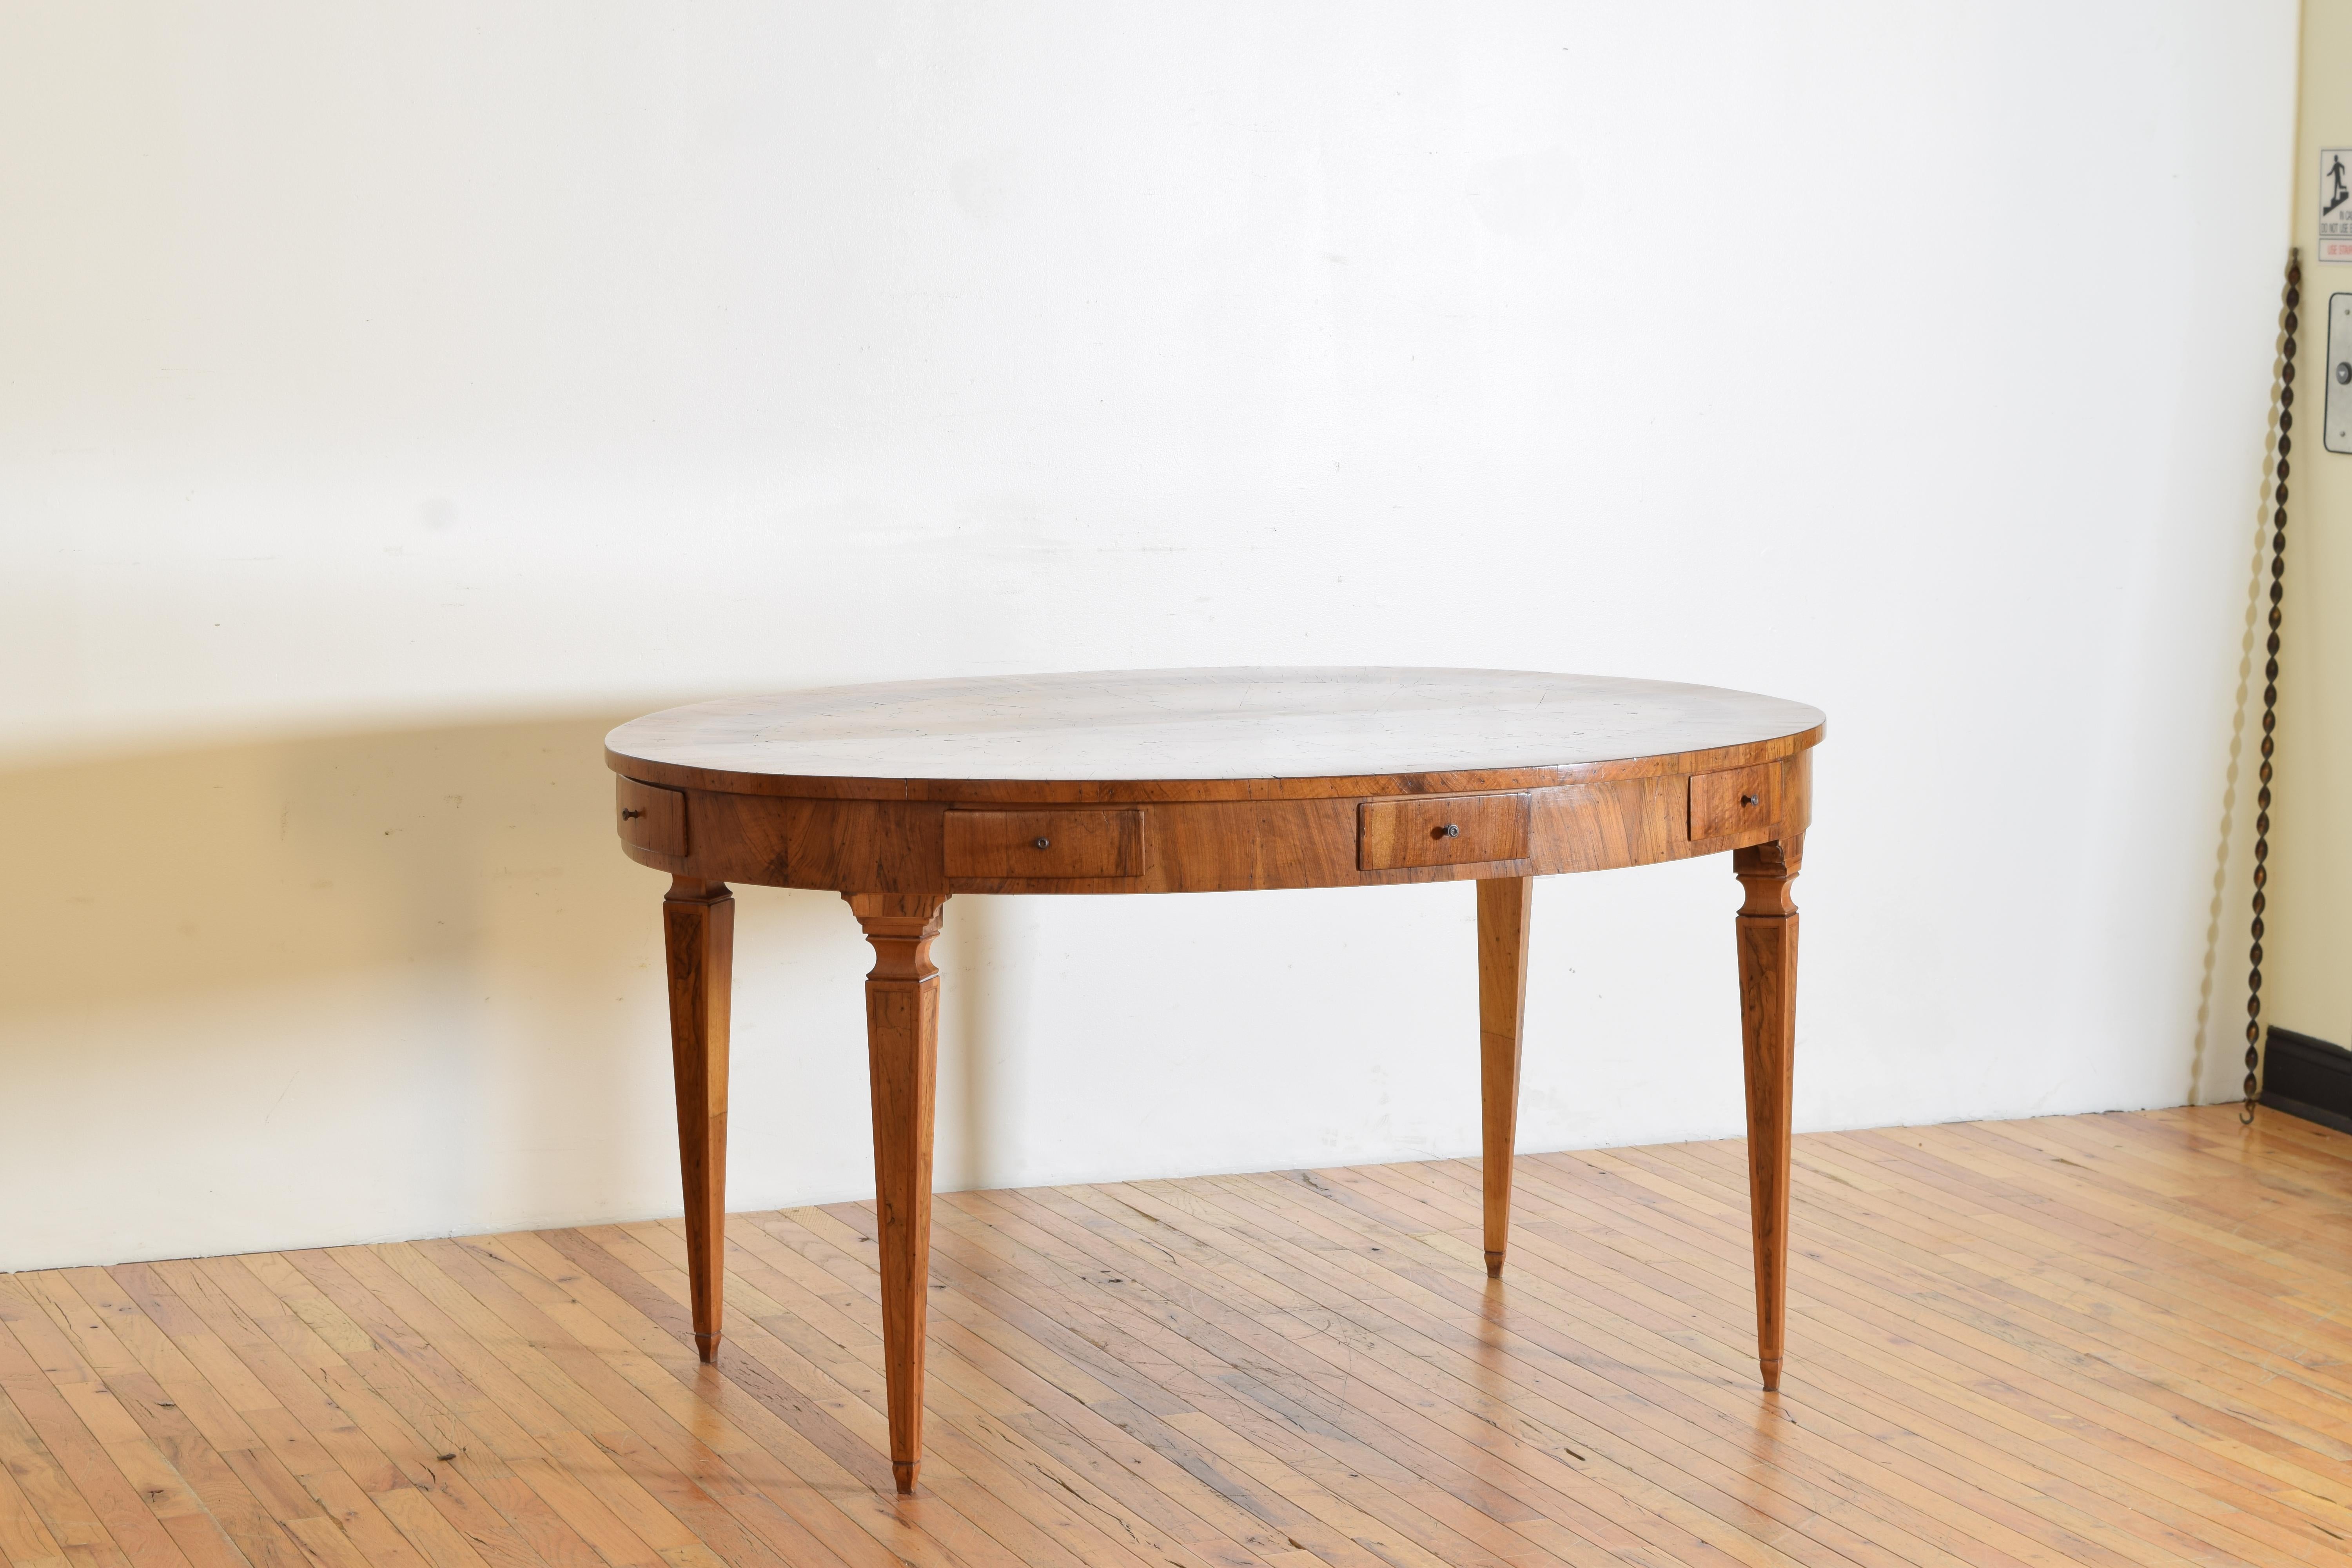 Neoclassical Italian Neoclassic Oval Marquetry Veneered 8 Drawer Library Table, early 19thc.